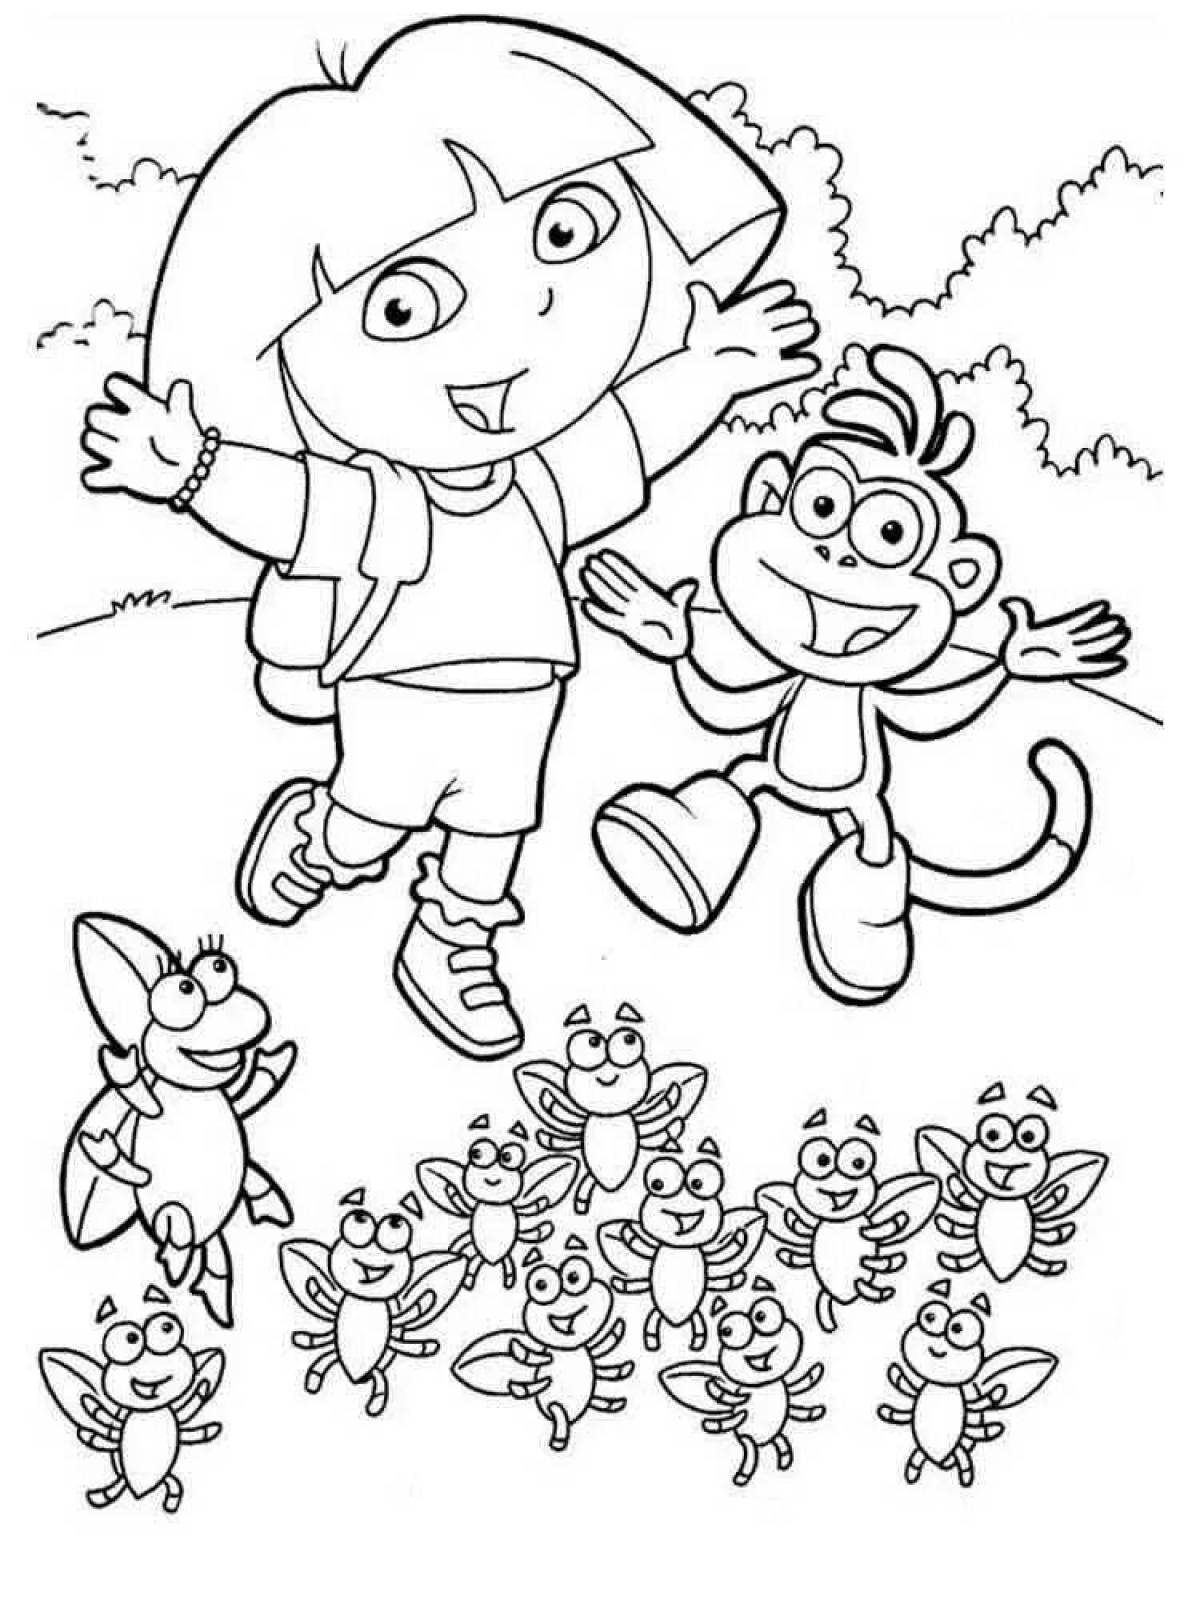 Glowing dora coloring page